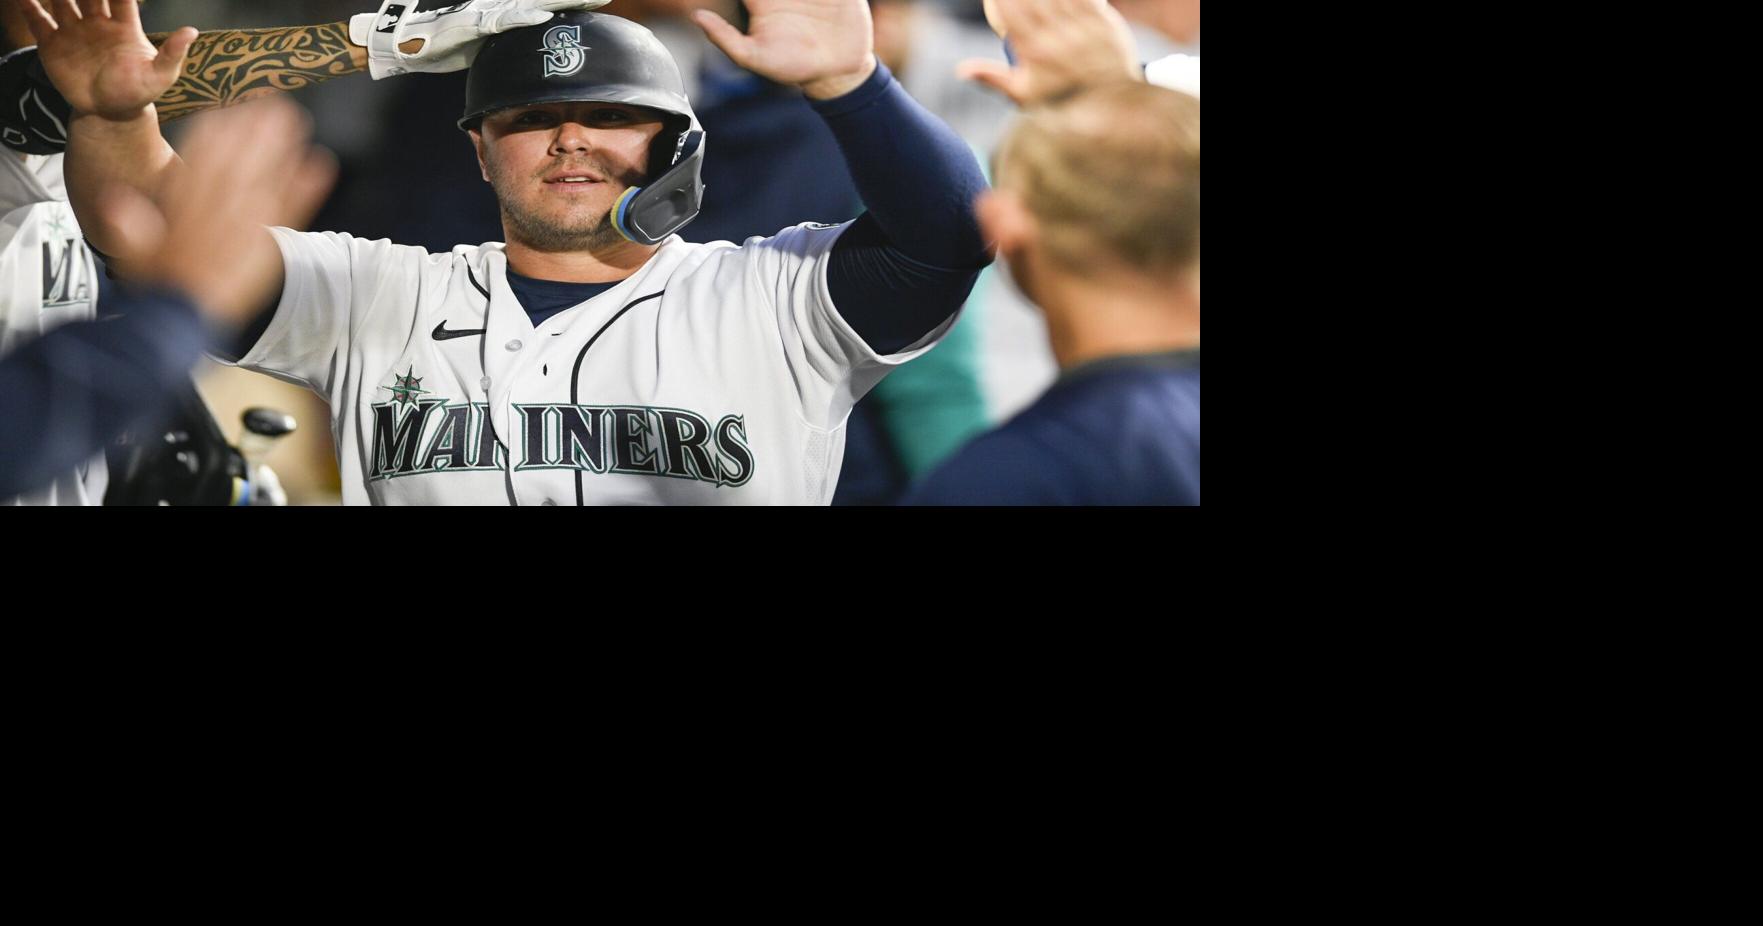 Mariners gain ground in playoff race by blanking Angels 8-0